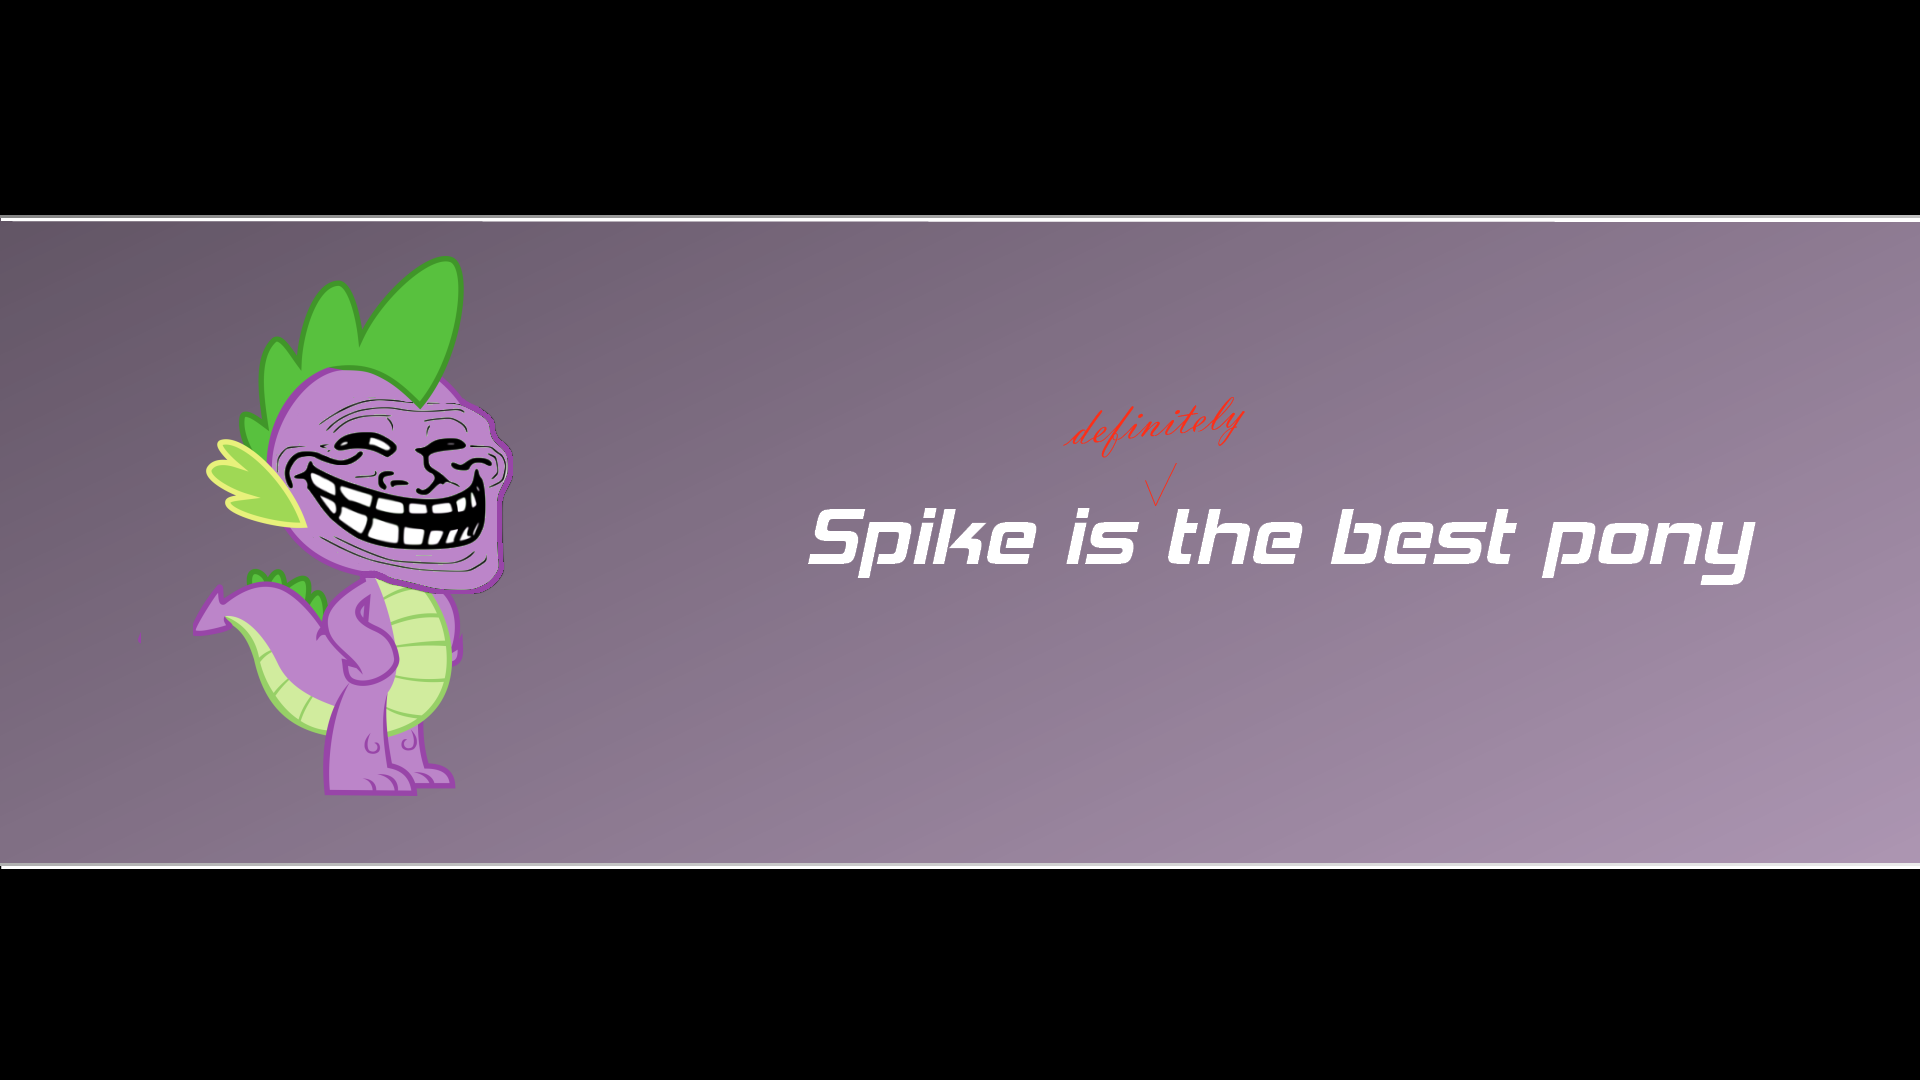 Spike is the best pony by DjChapica and extreme-sonic